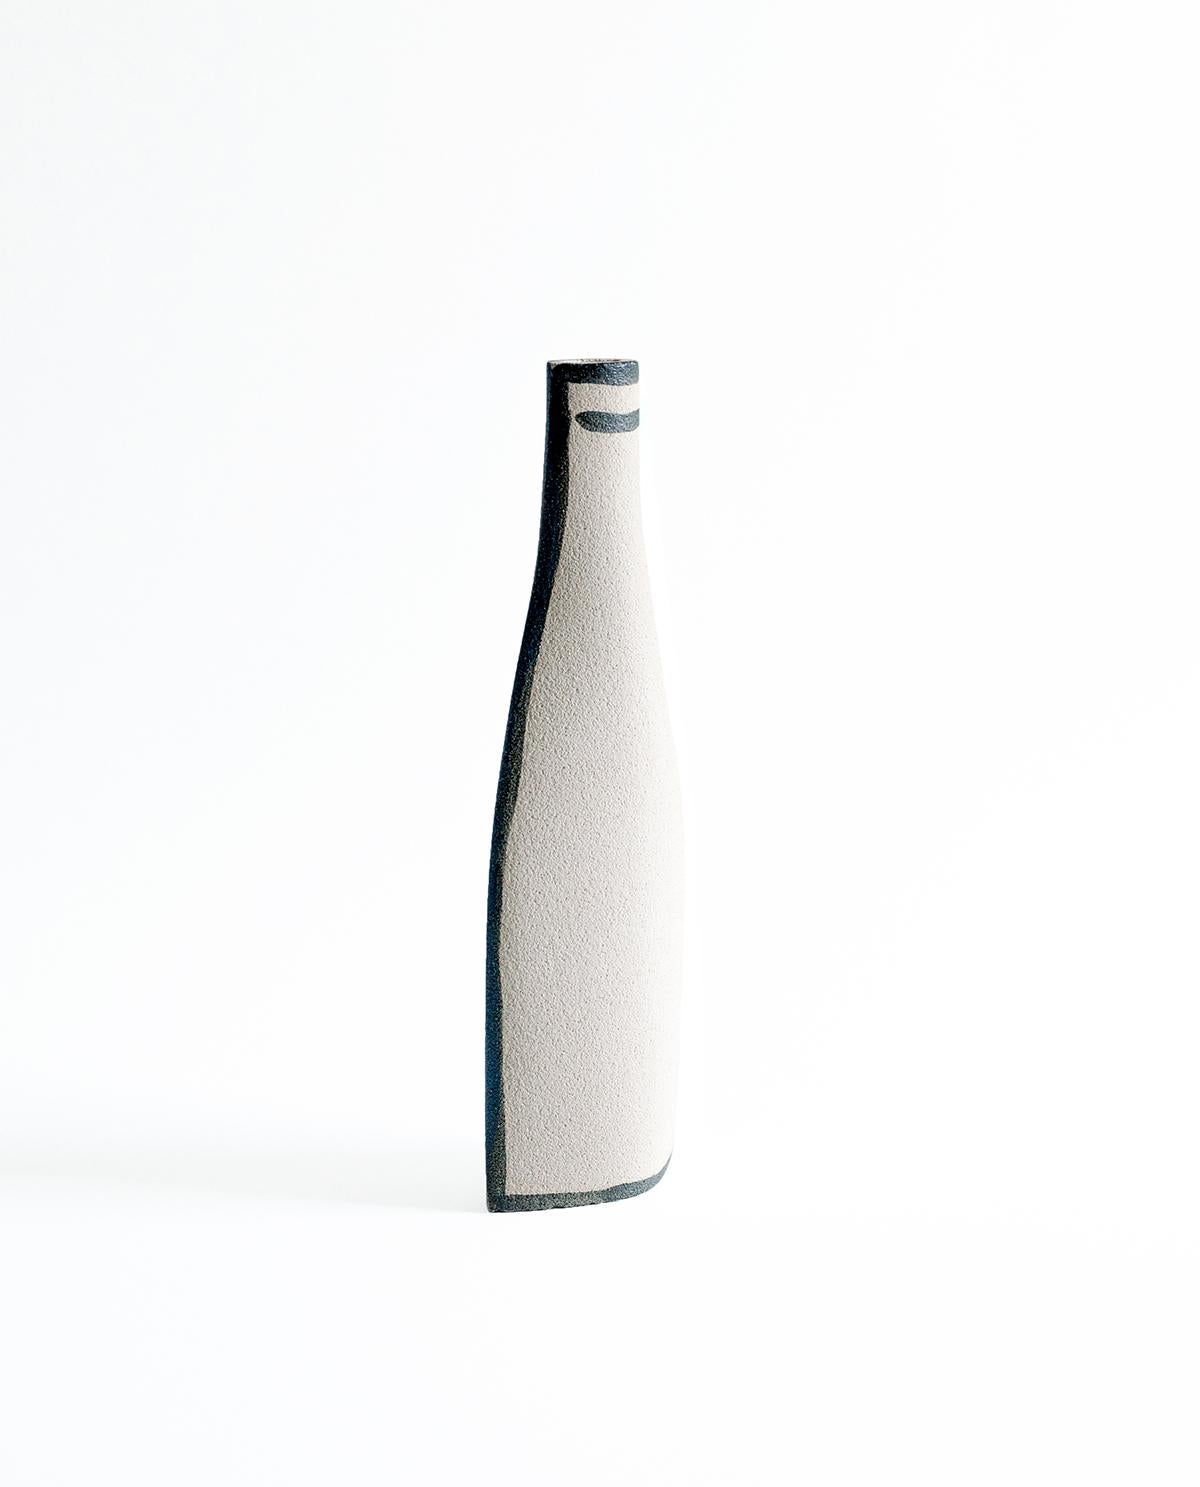 Minimalist 21st Century ‘Morandi Bouteille - Black’, in White Ceramic, Crafted in France For Sale